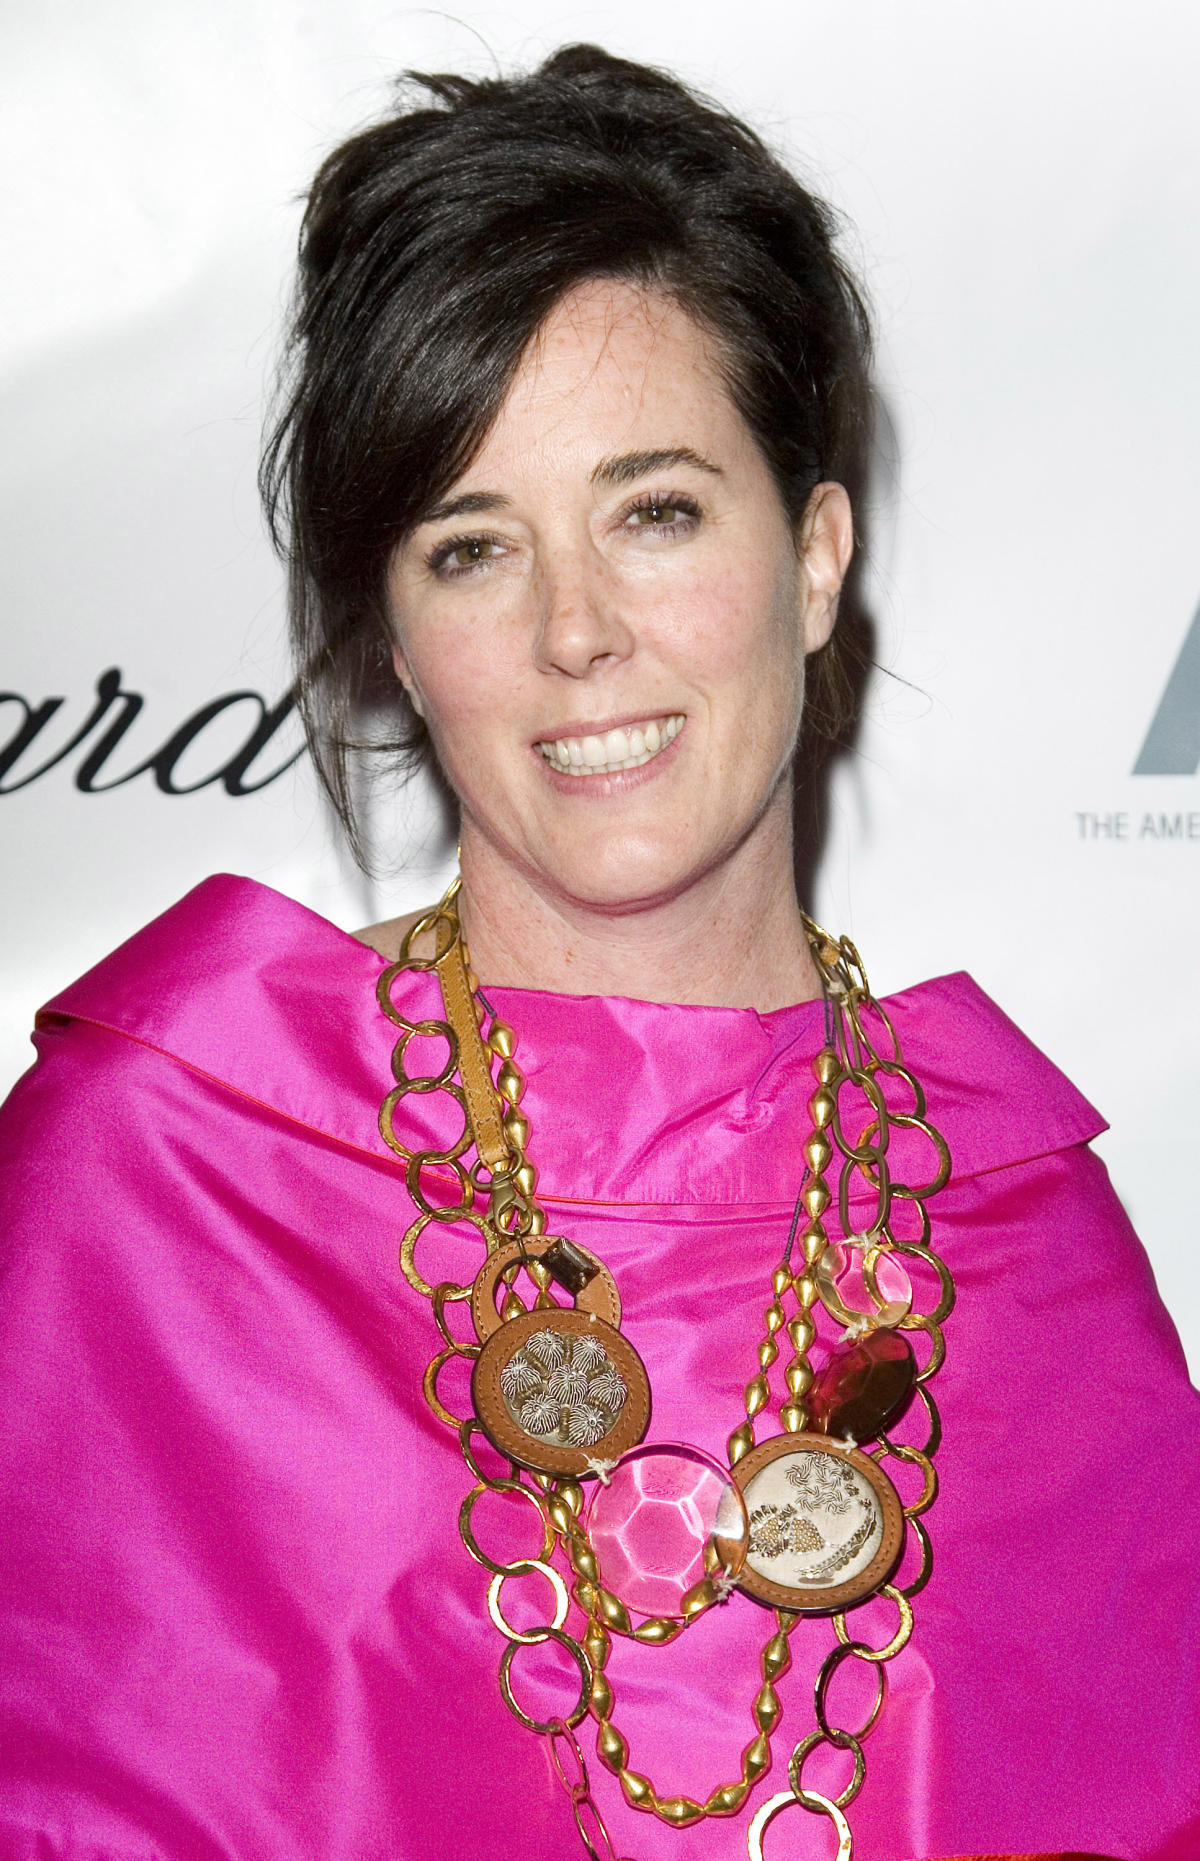 Kate Spade Death: What We Learn When a Celebrity Dies by Suicide